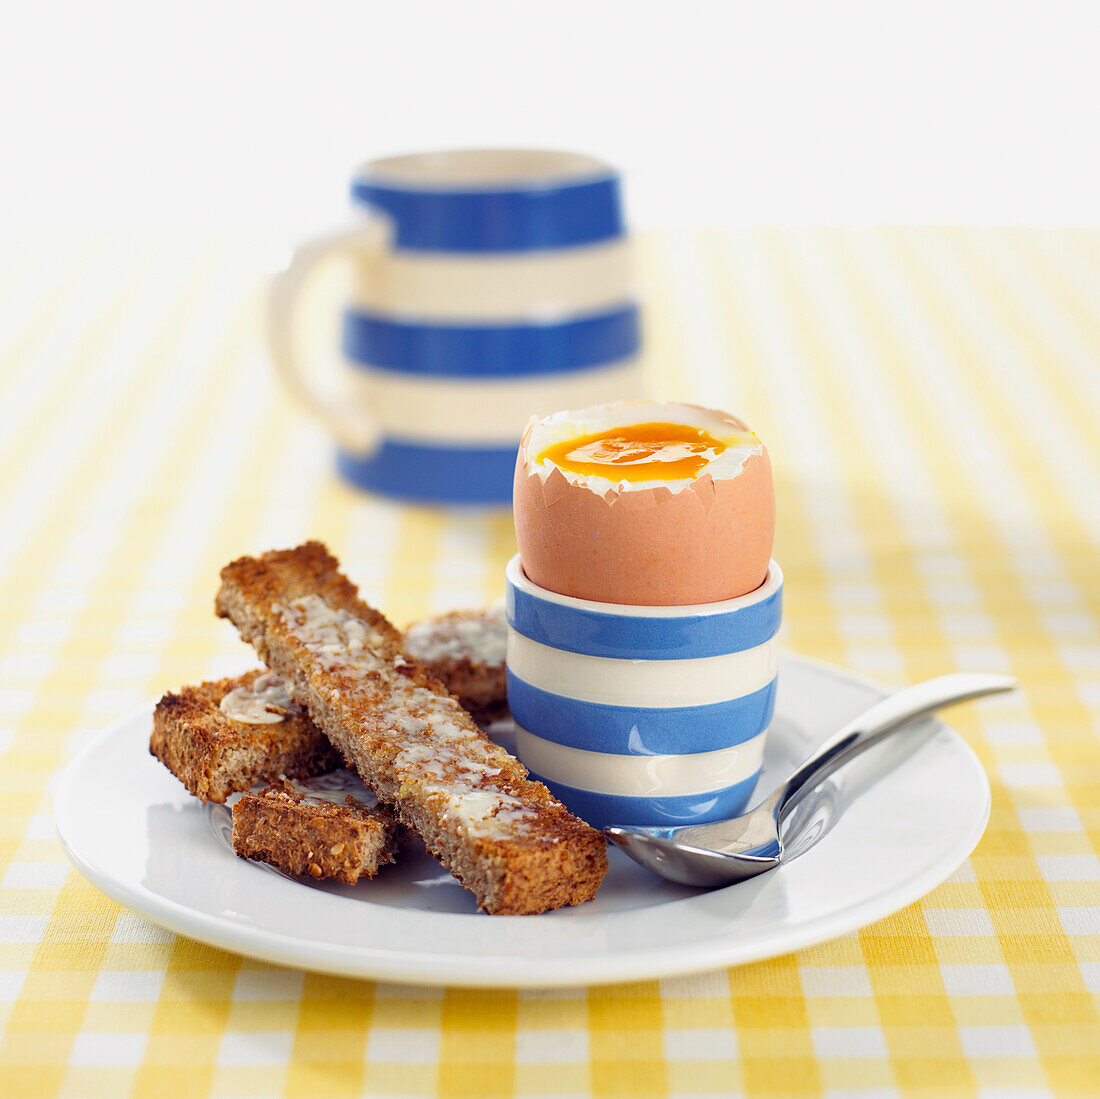 Boiled egg with toast